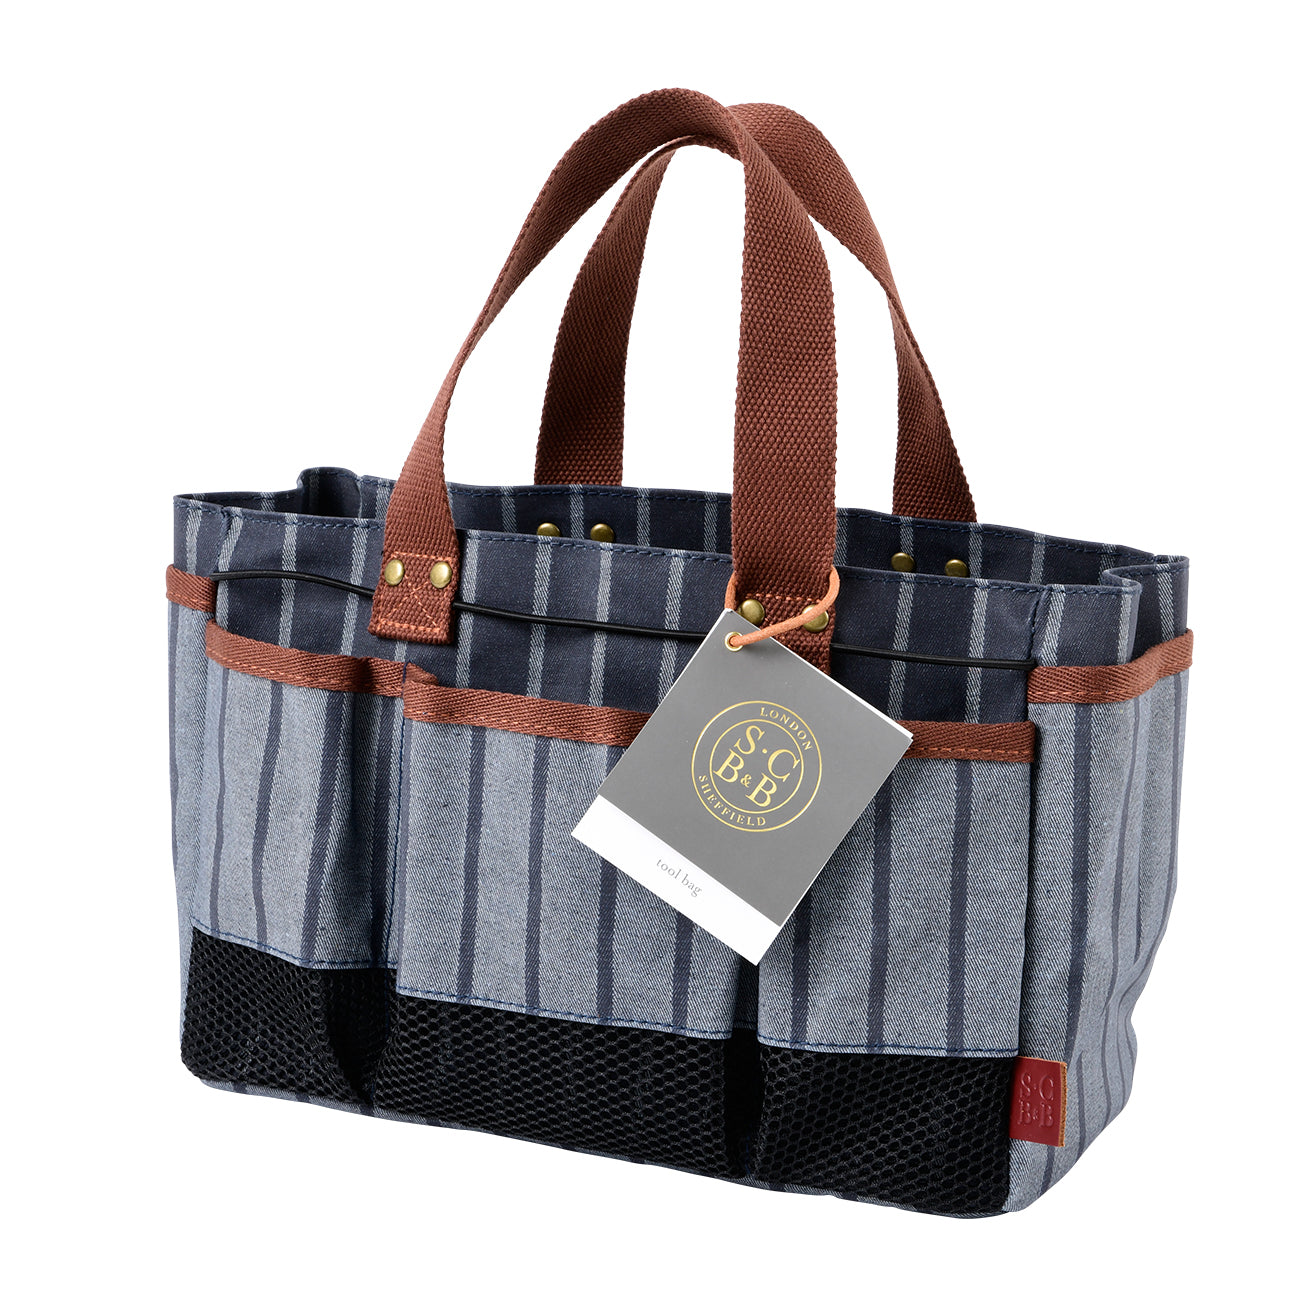 Sophie Conran for Burgon & Ball Garden Tool Bag, Blue Stripe with Product Tag